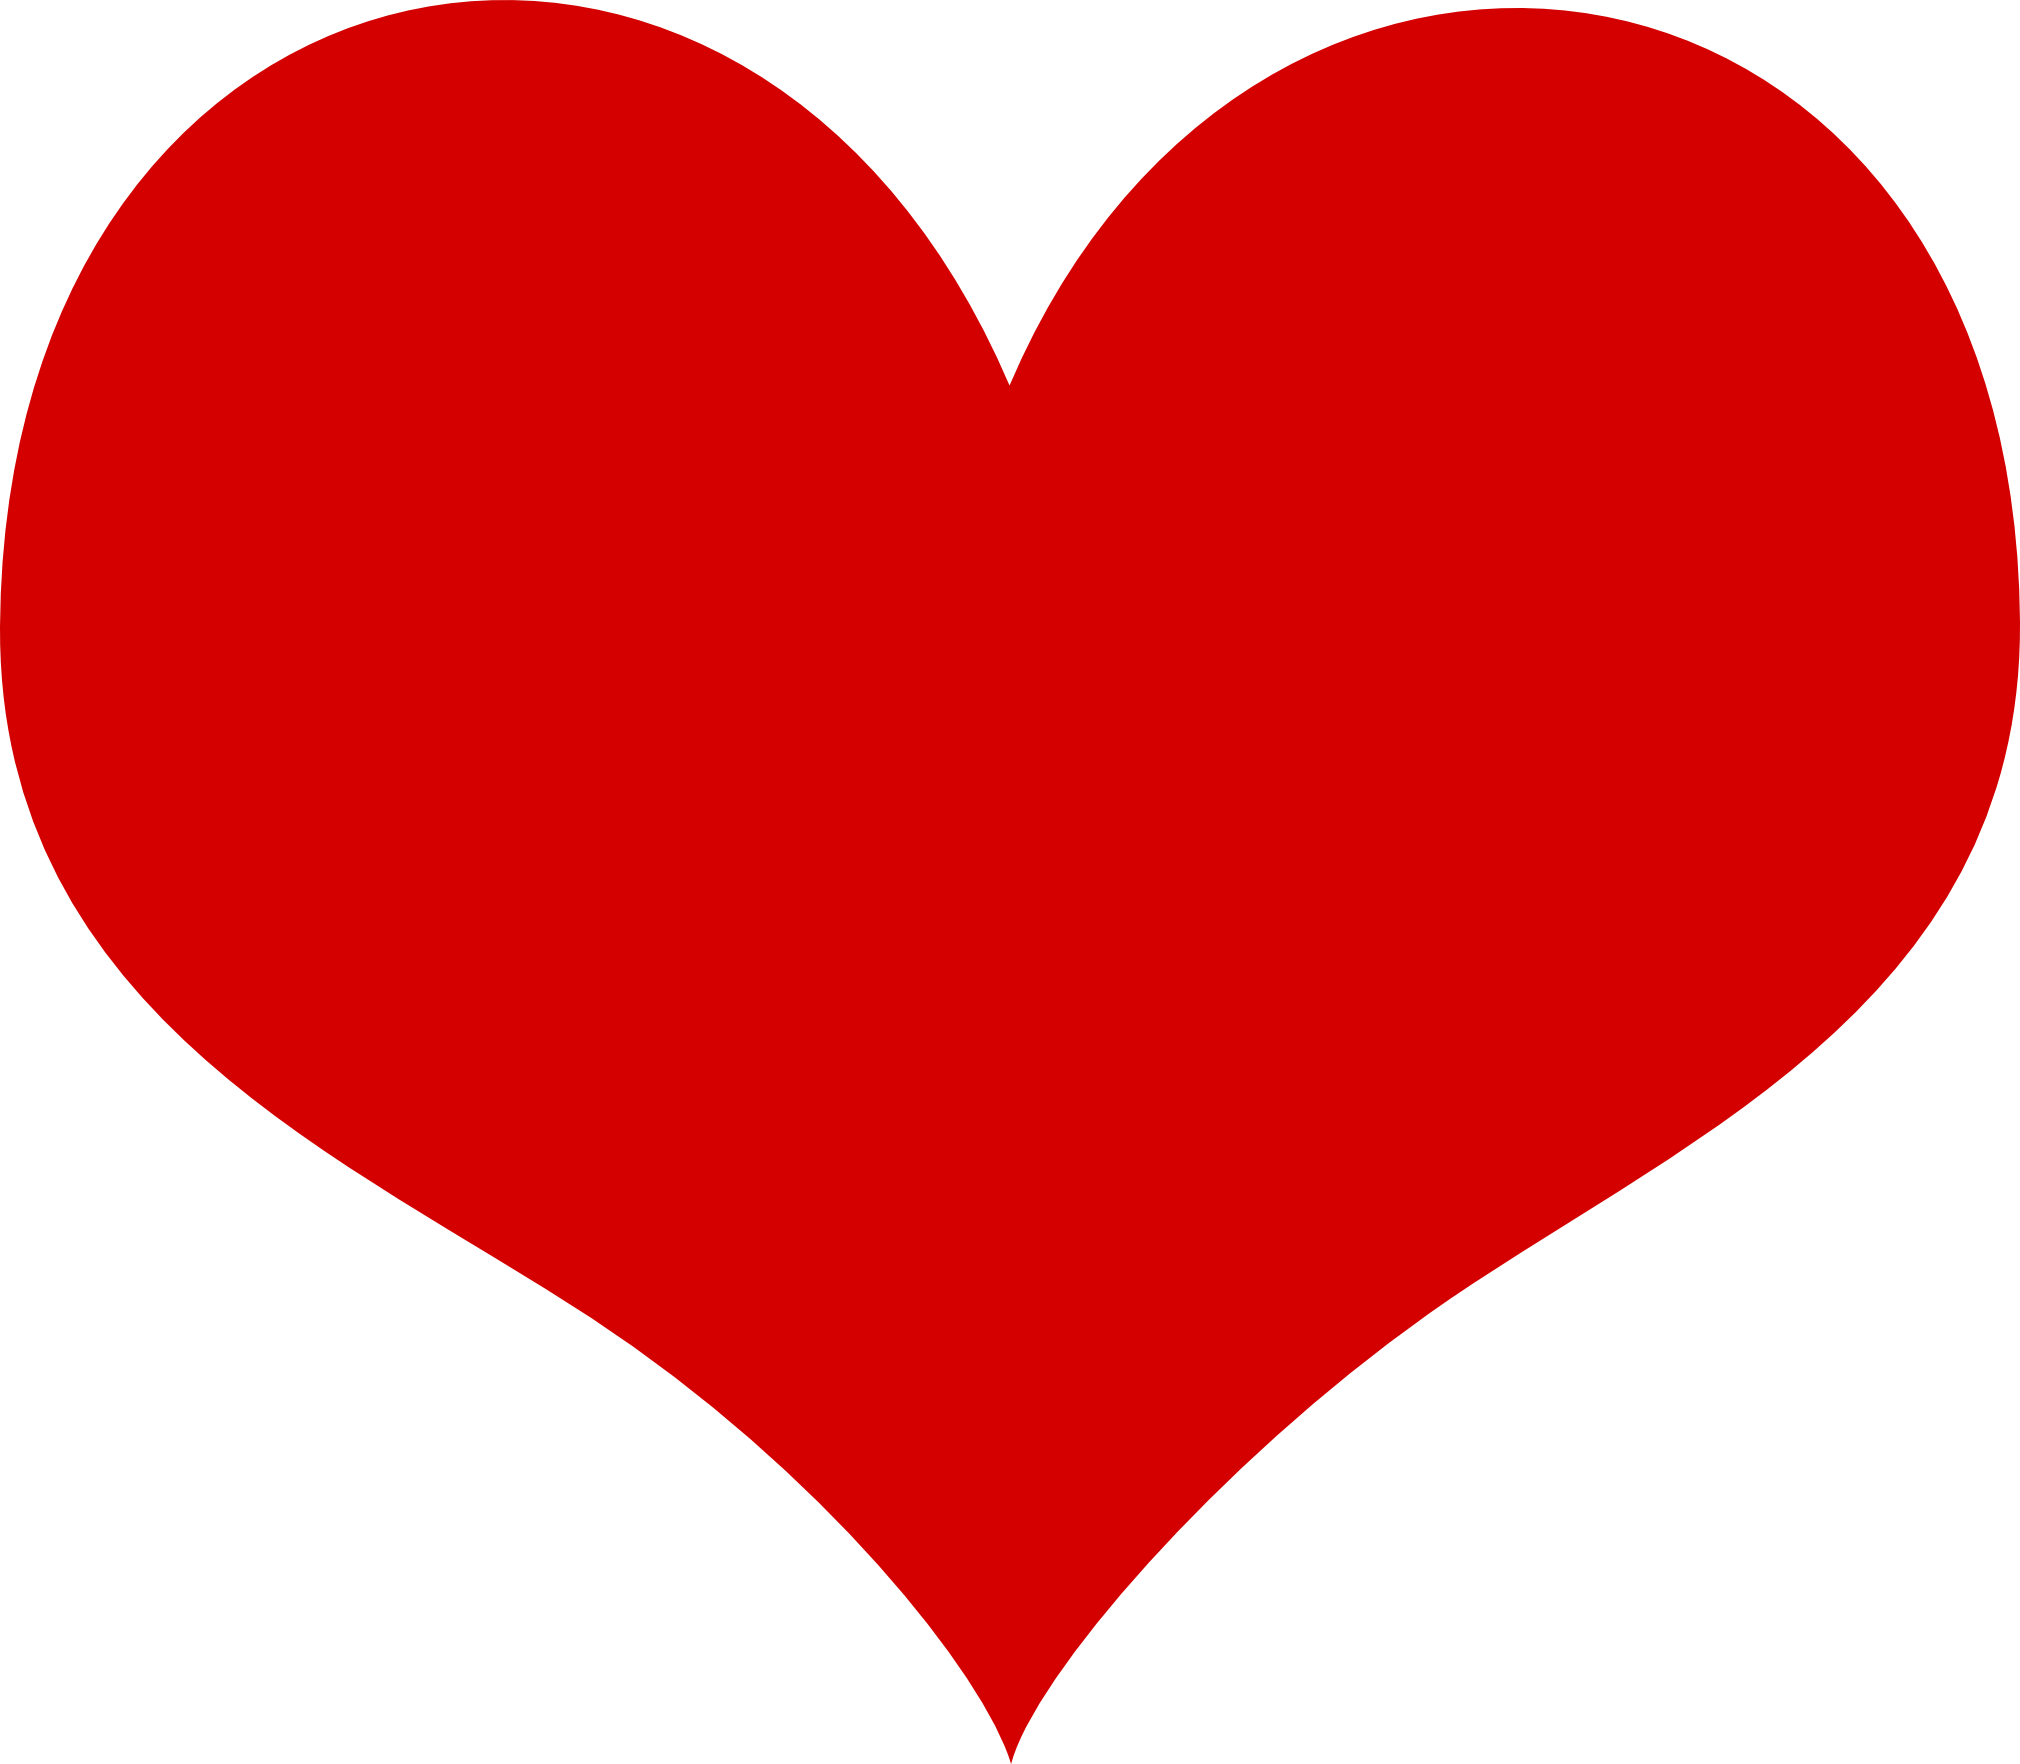 Free Heart Shaped Png, Download Free Heart Shaped Png png images, Free